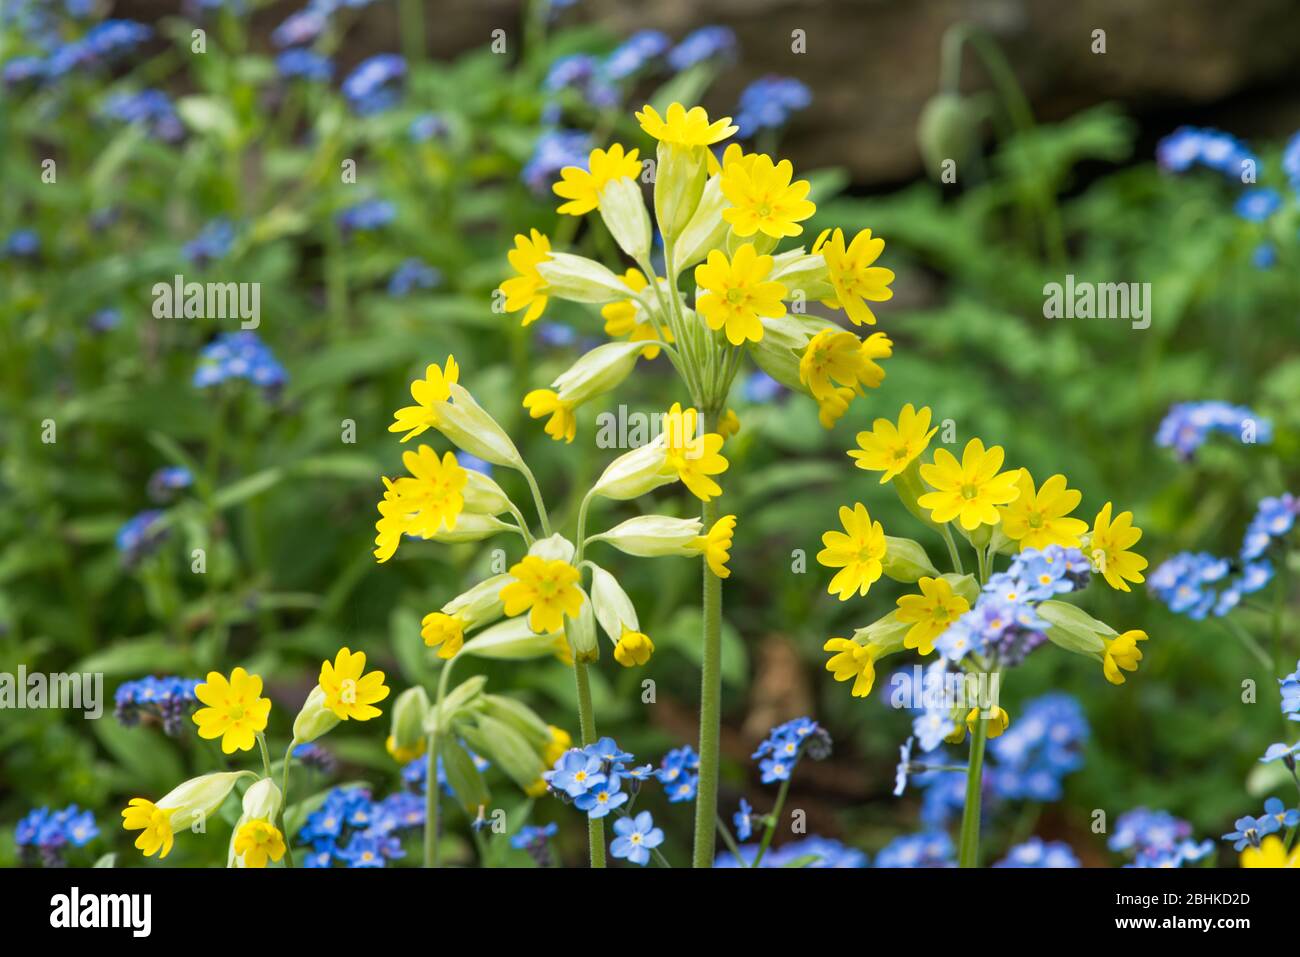 Flowering cowslip amongst forget me nots in a UK garden in spring Stock Photo